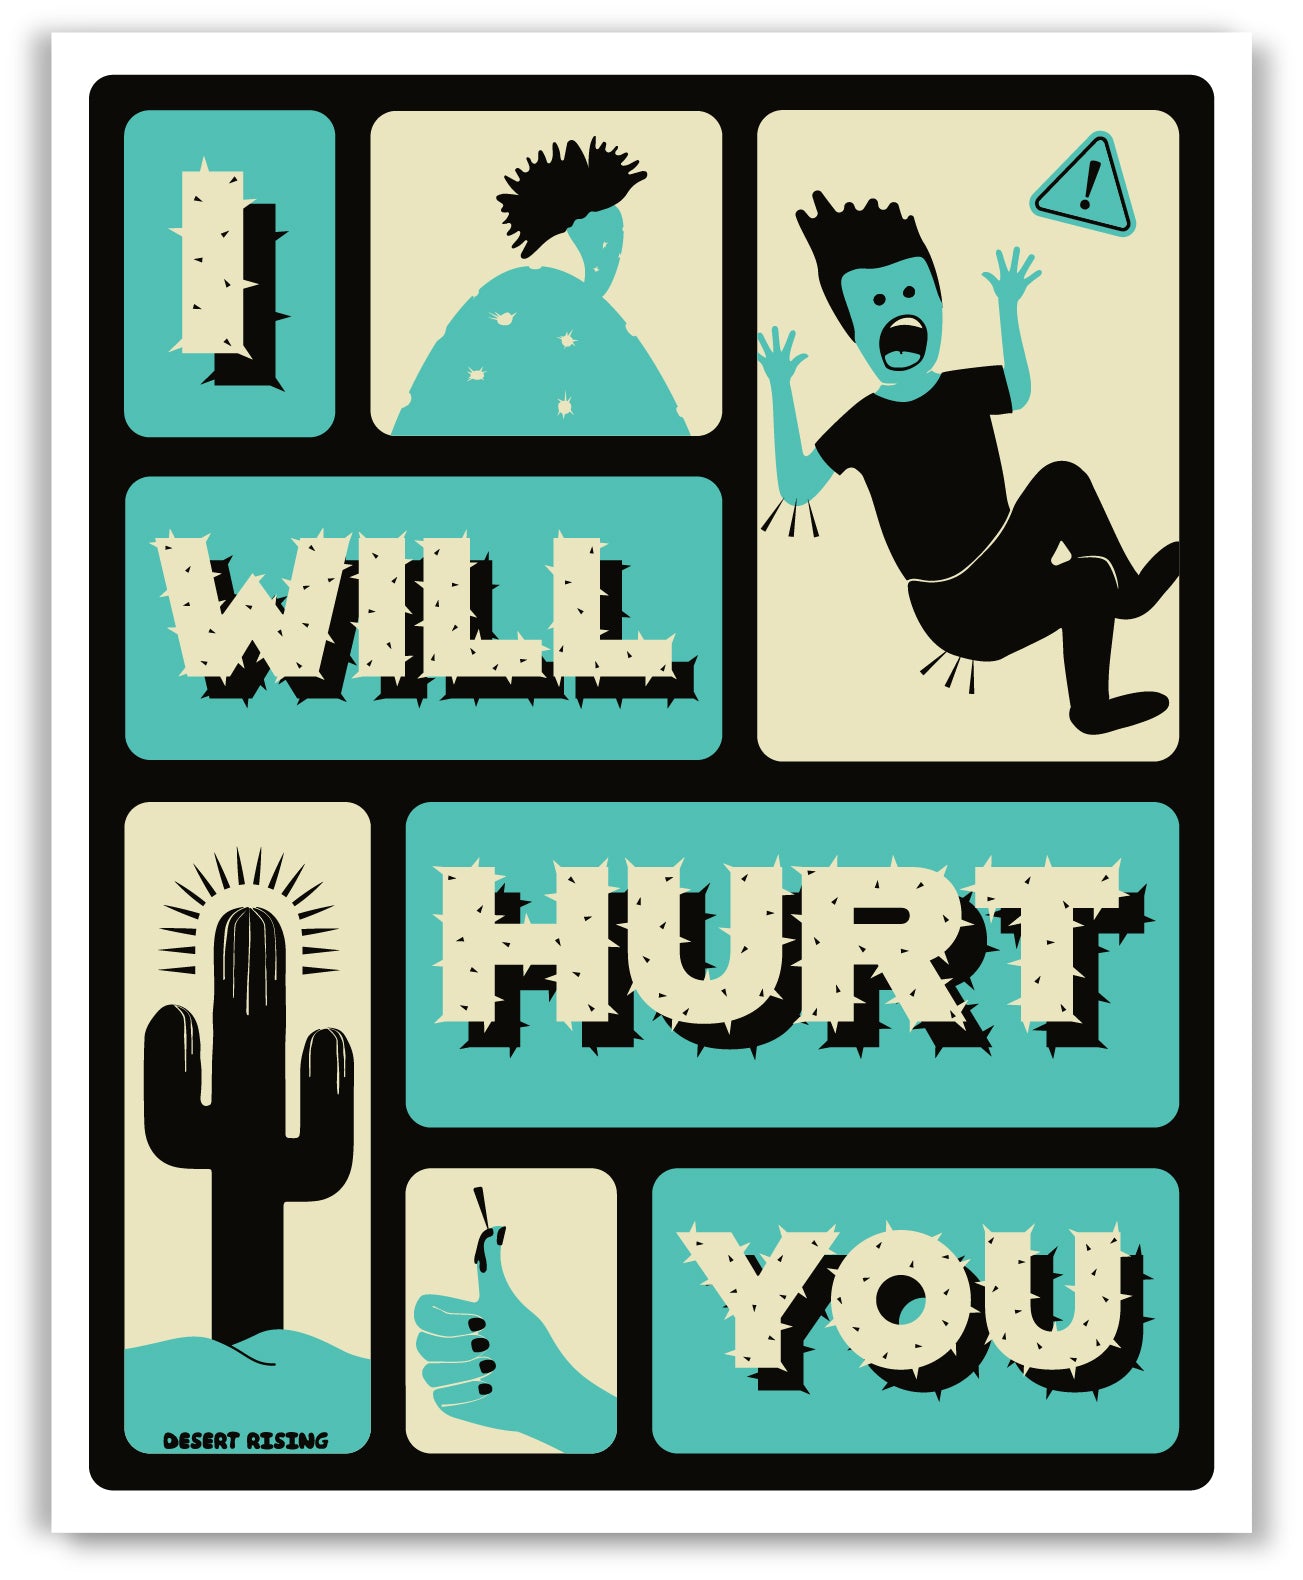 Cactus humor art print will bring a punch of color to your interiors